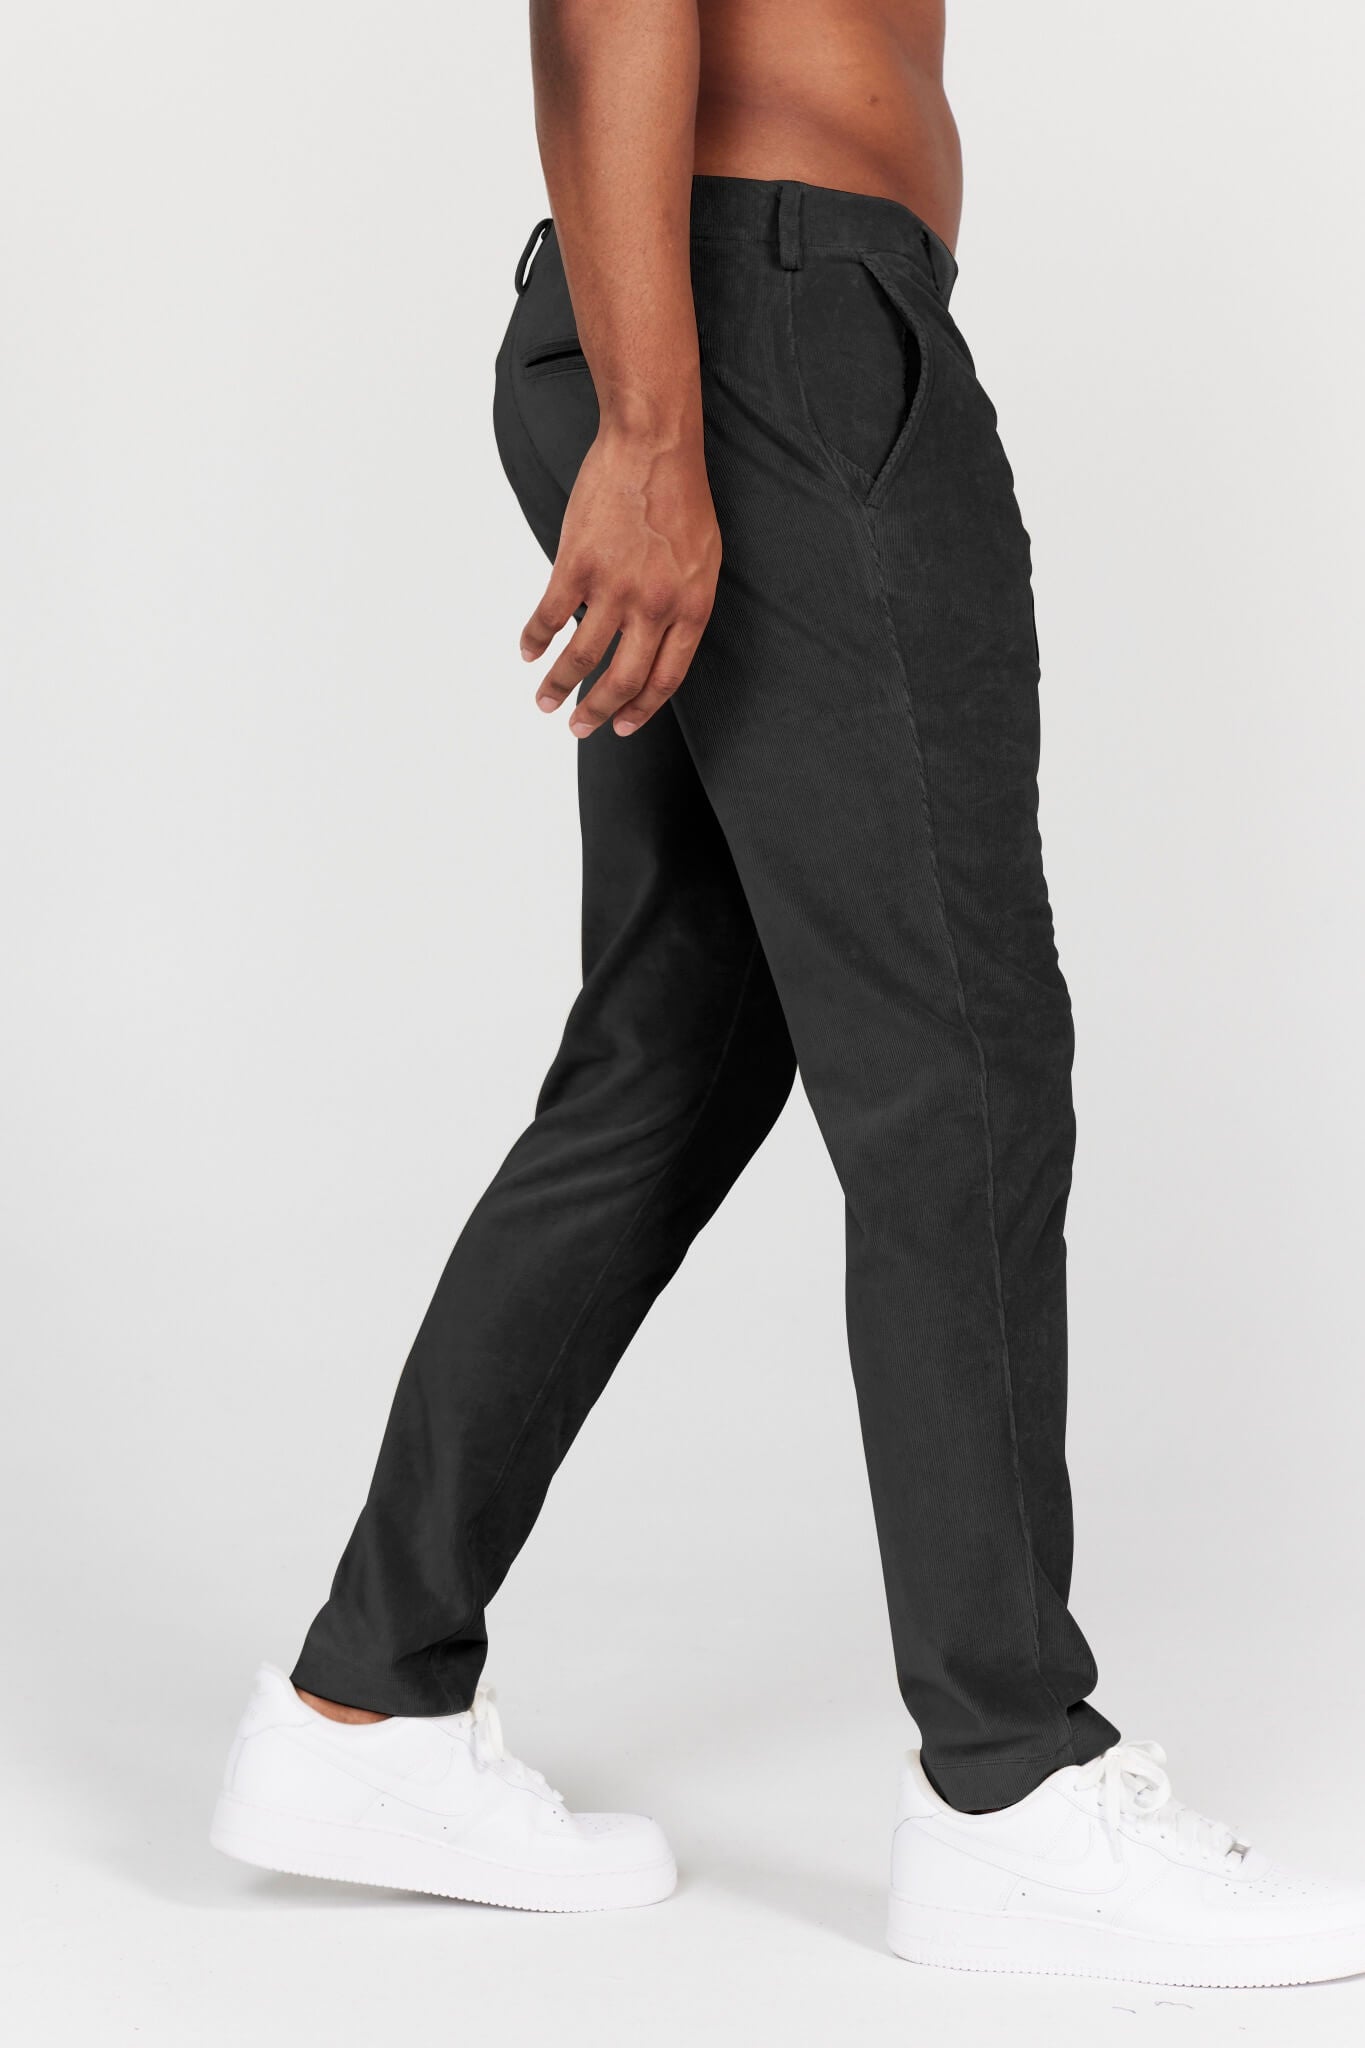 Collins Pull-On Corduroy Trouser in Tuxedo